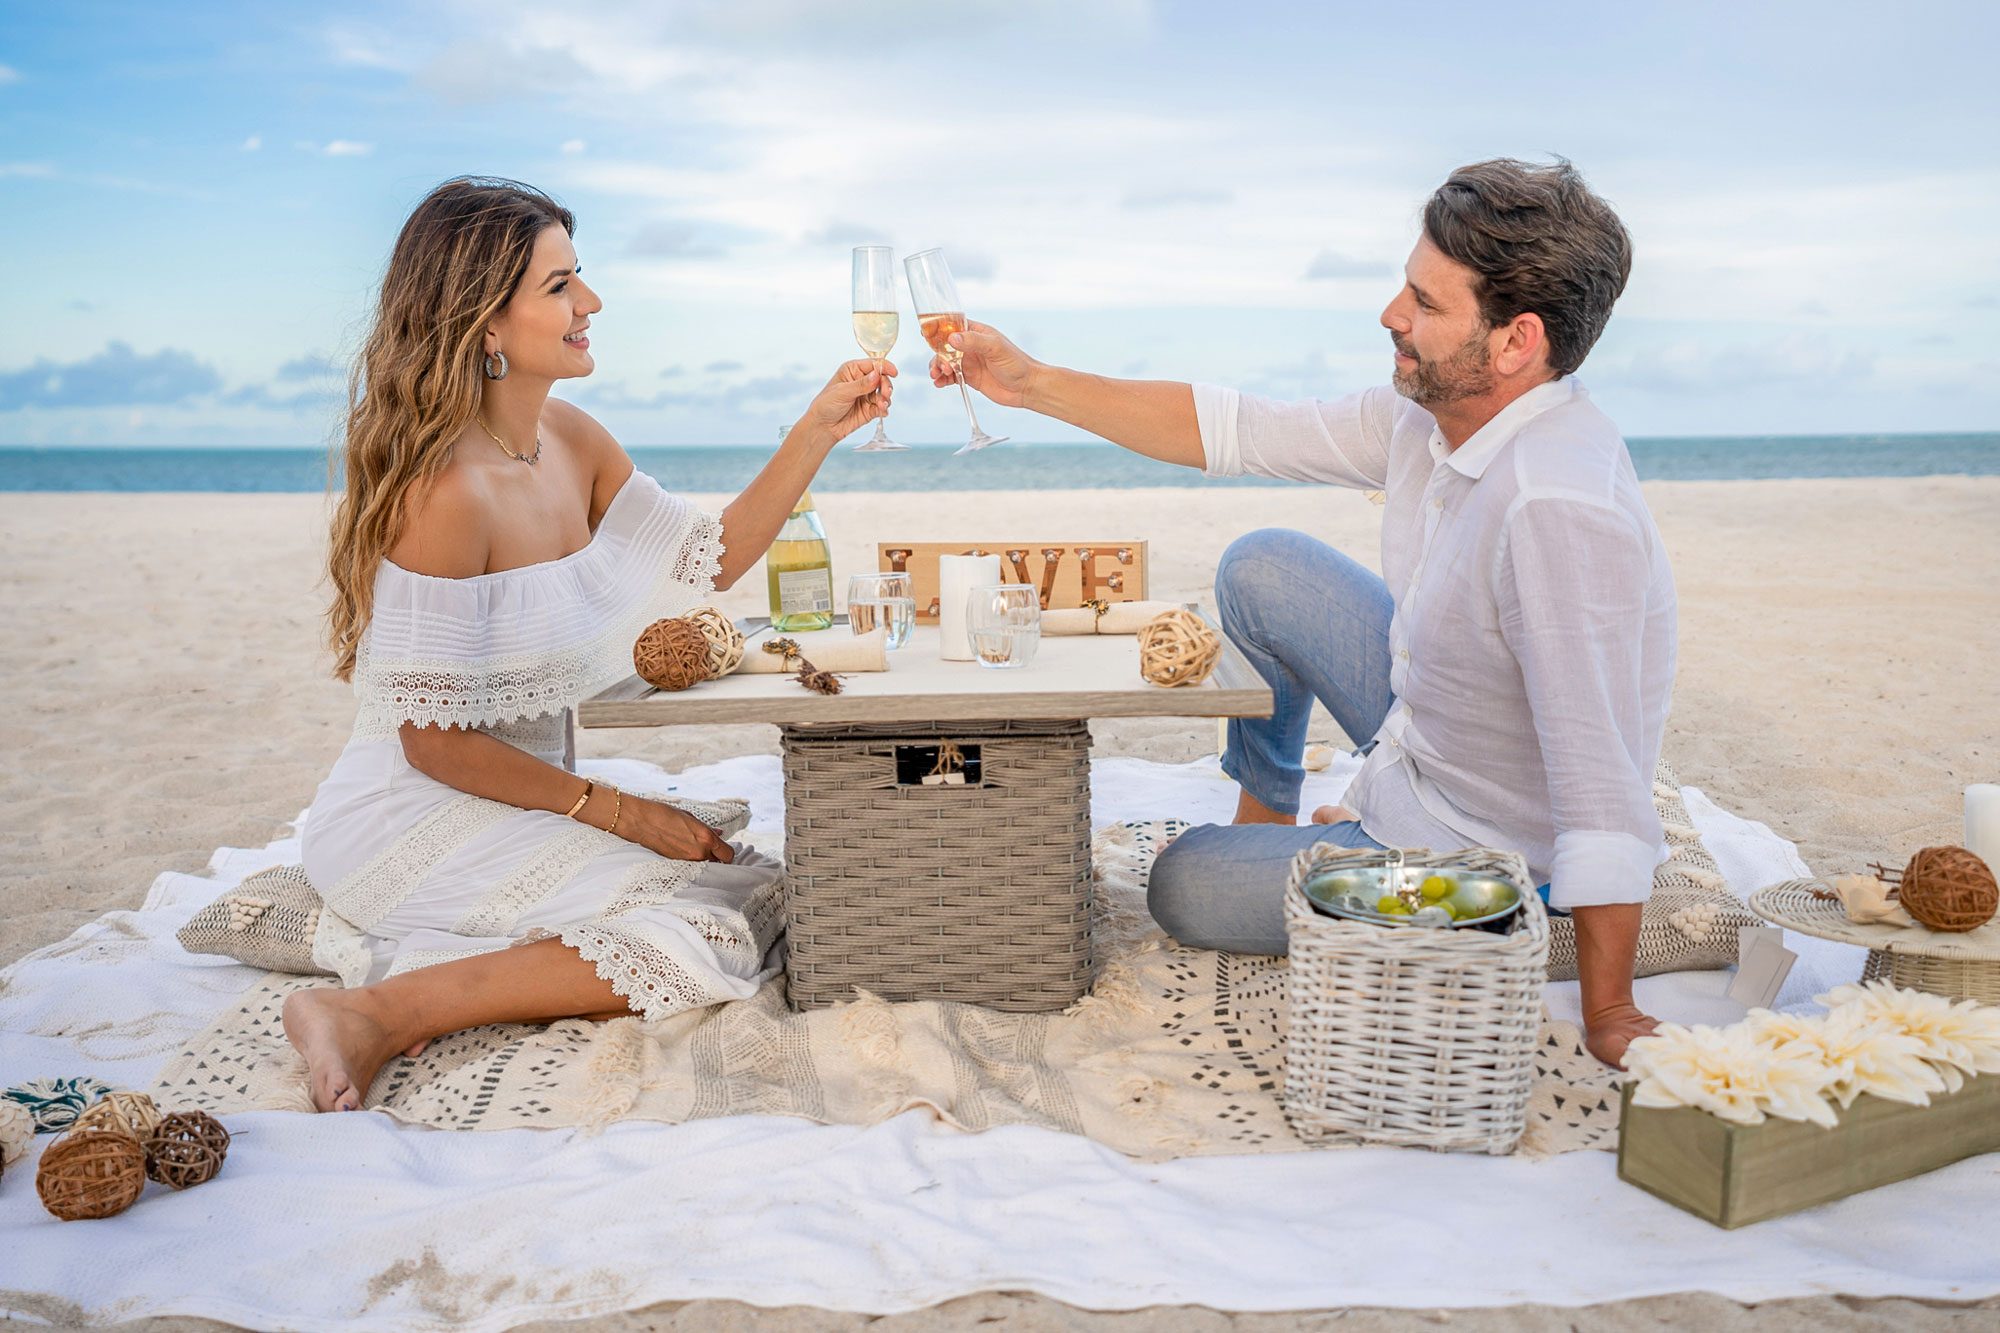 Loving Couple On A Romantic Dinner At The Beach